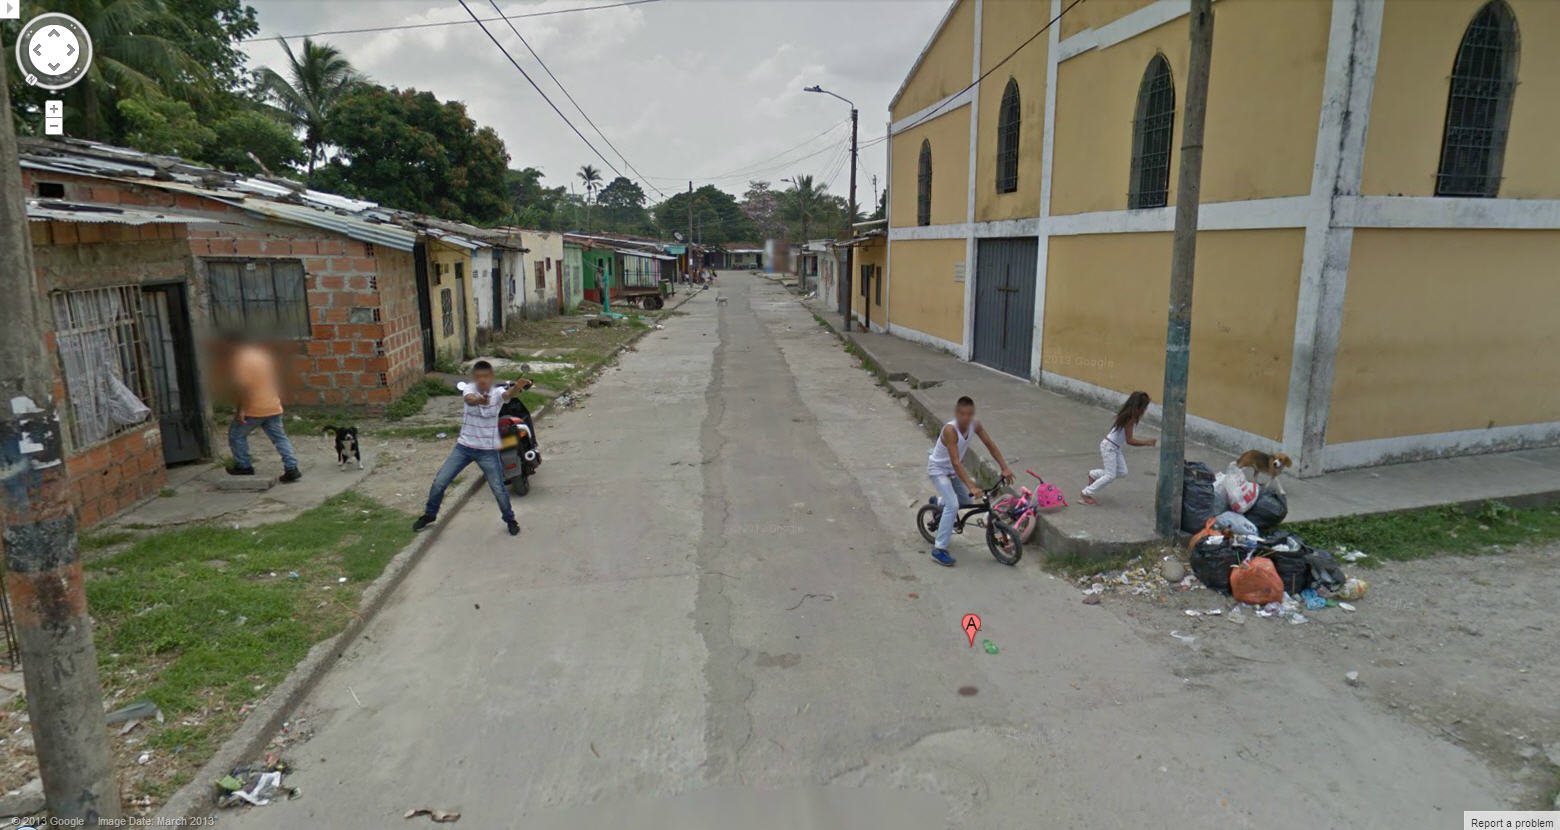 People shooting at the Google Street View car in Colombia